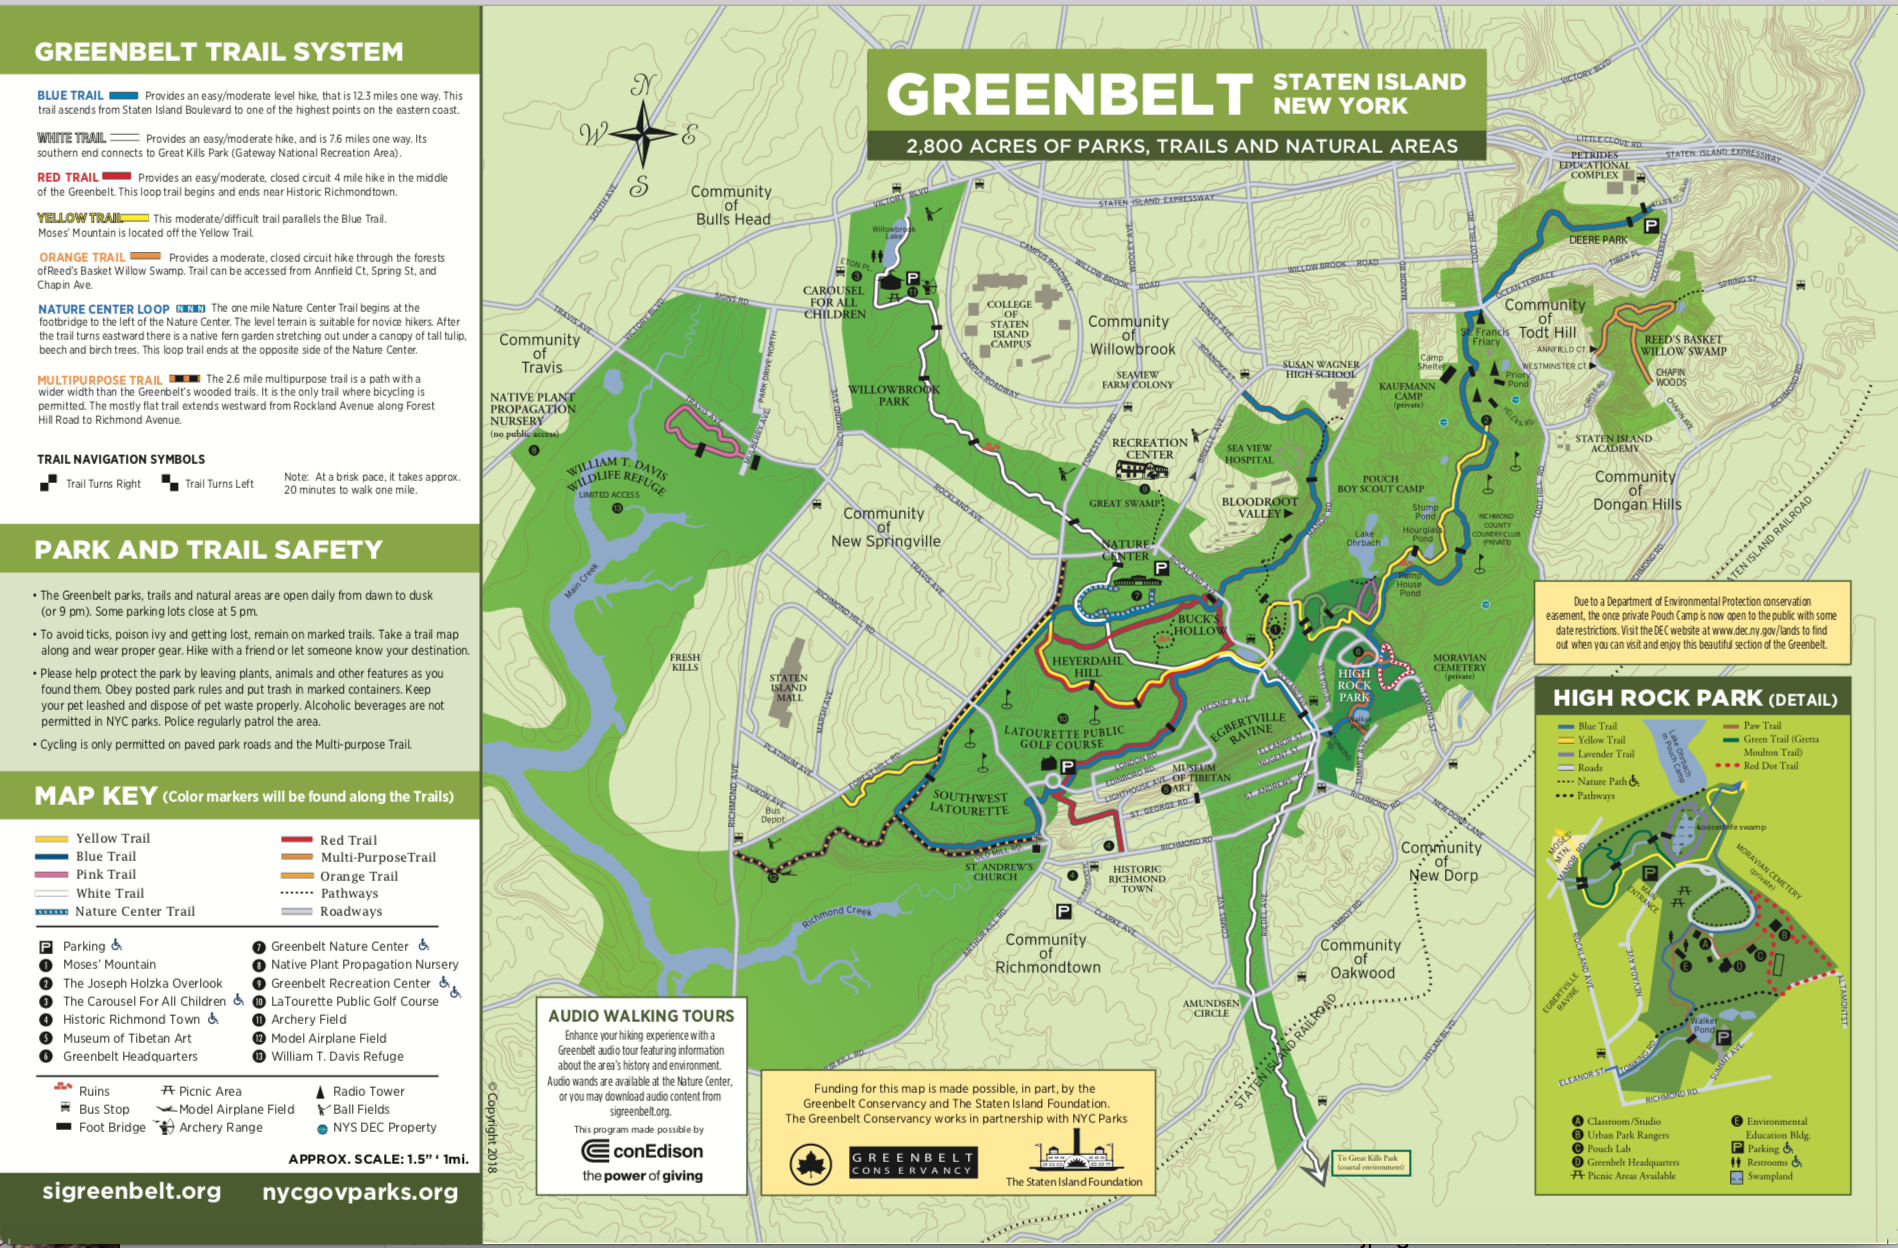 Staten Island Greenbelt Trail Map Hiking And Running Trails Are Open For Solitary Recreation. The Greenbelt  Nature And Recreation Centers Are Closed. Programs Canceled Through April  29. – Greenbelt Conservancy